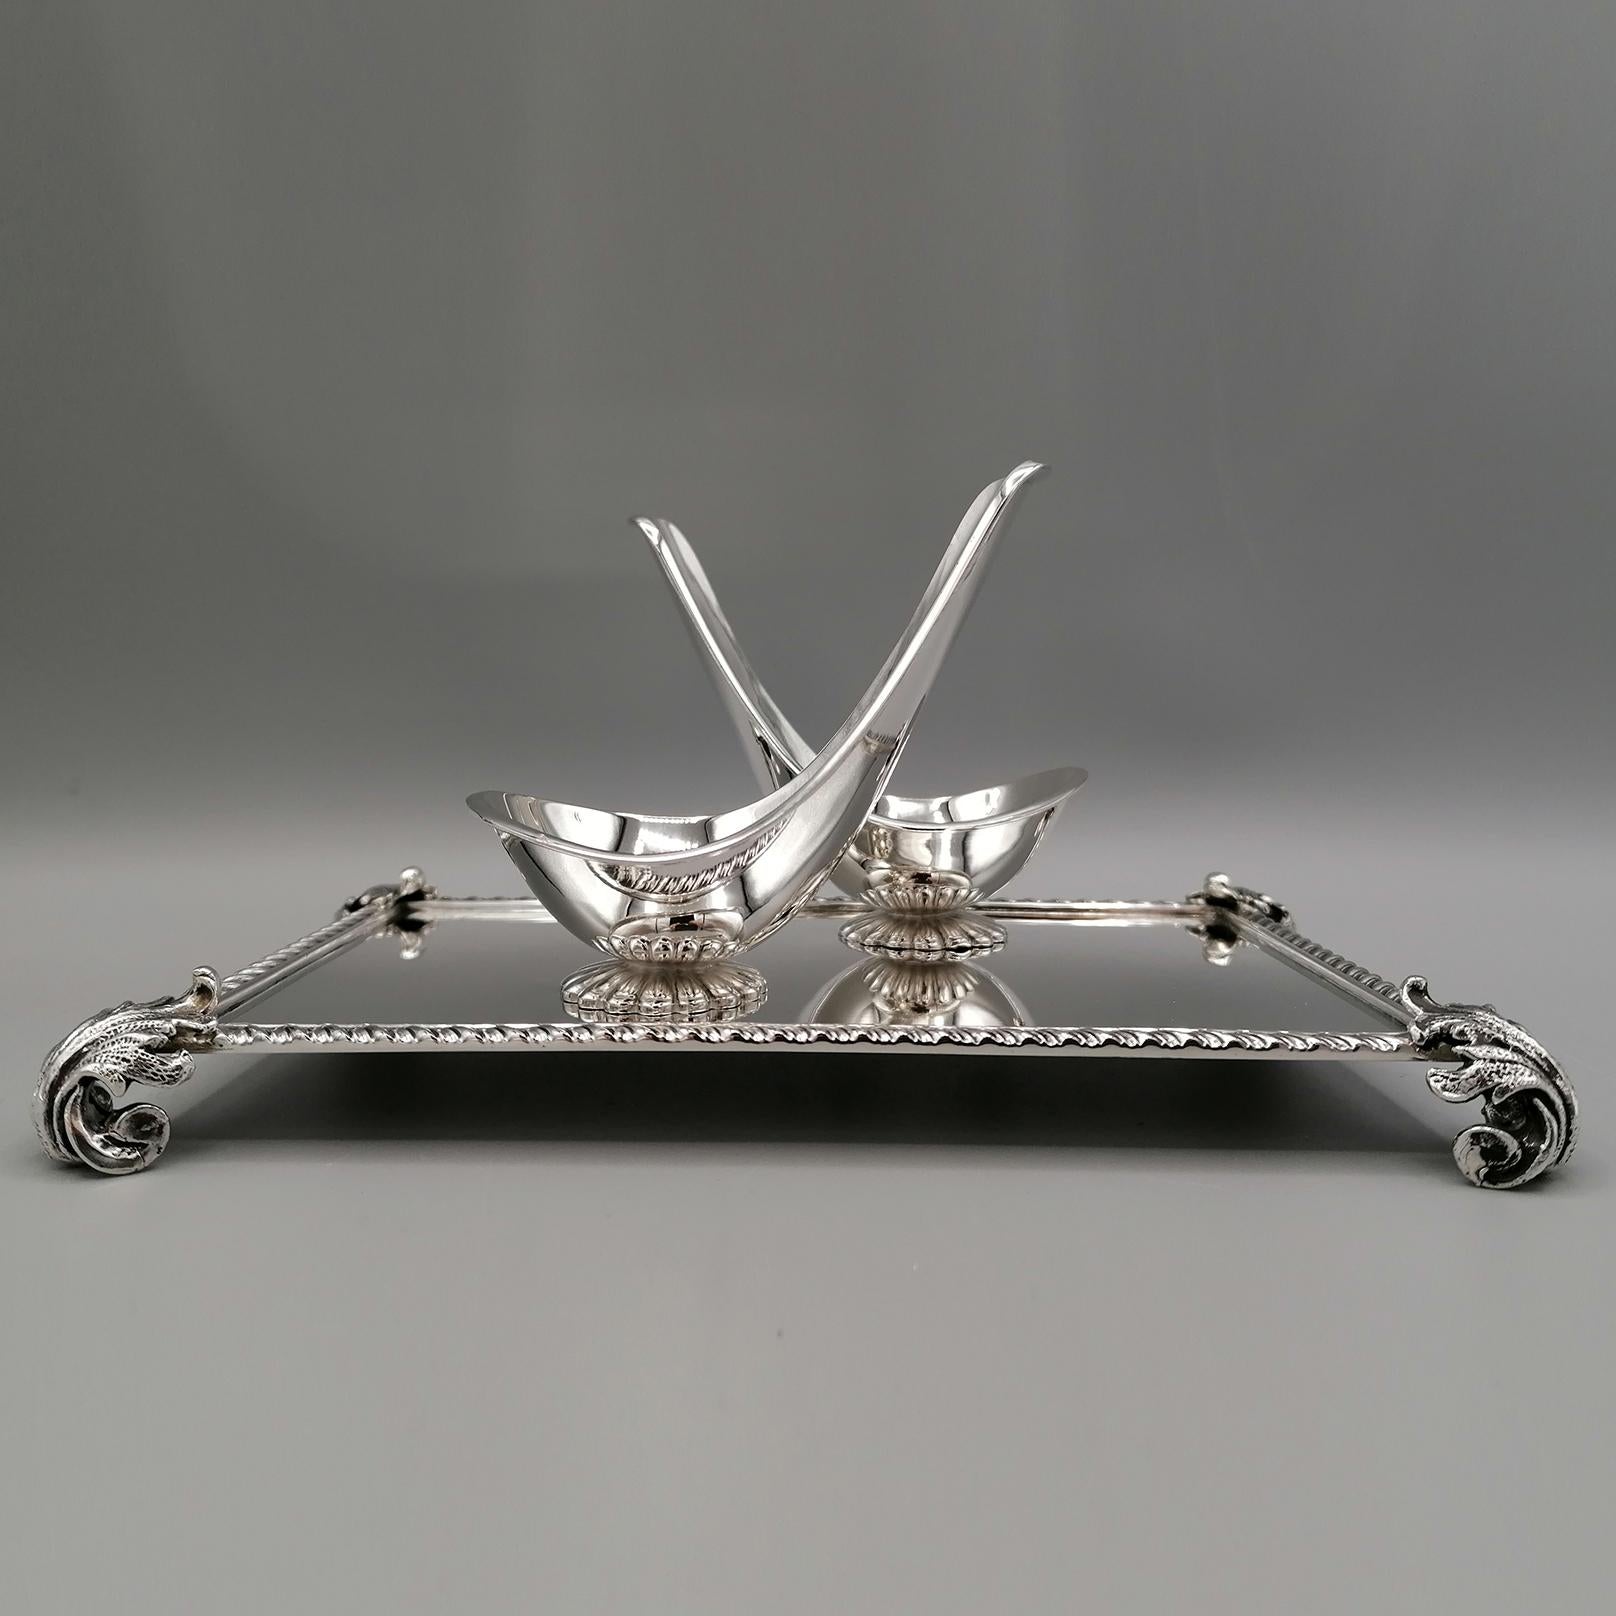 Queen Anne style double pipe holder in solid silver. 
The pipe holders have a round fluted base pods and are fixed on the silver tray with small bolts that are removable for cleaning.
The tray has the Classic Queen Anne style edge and is raised by